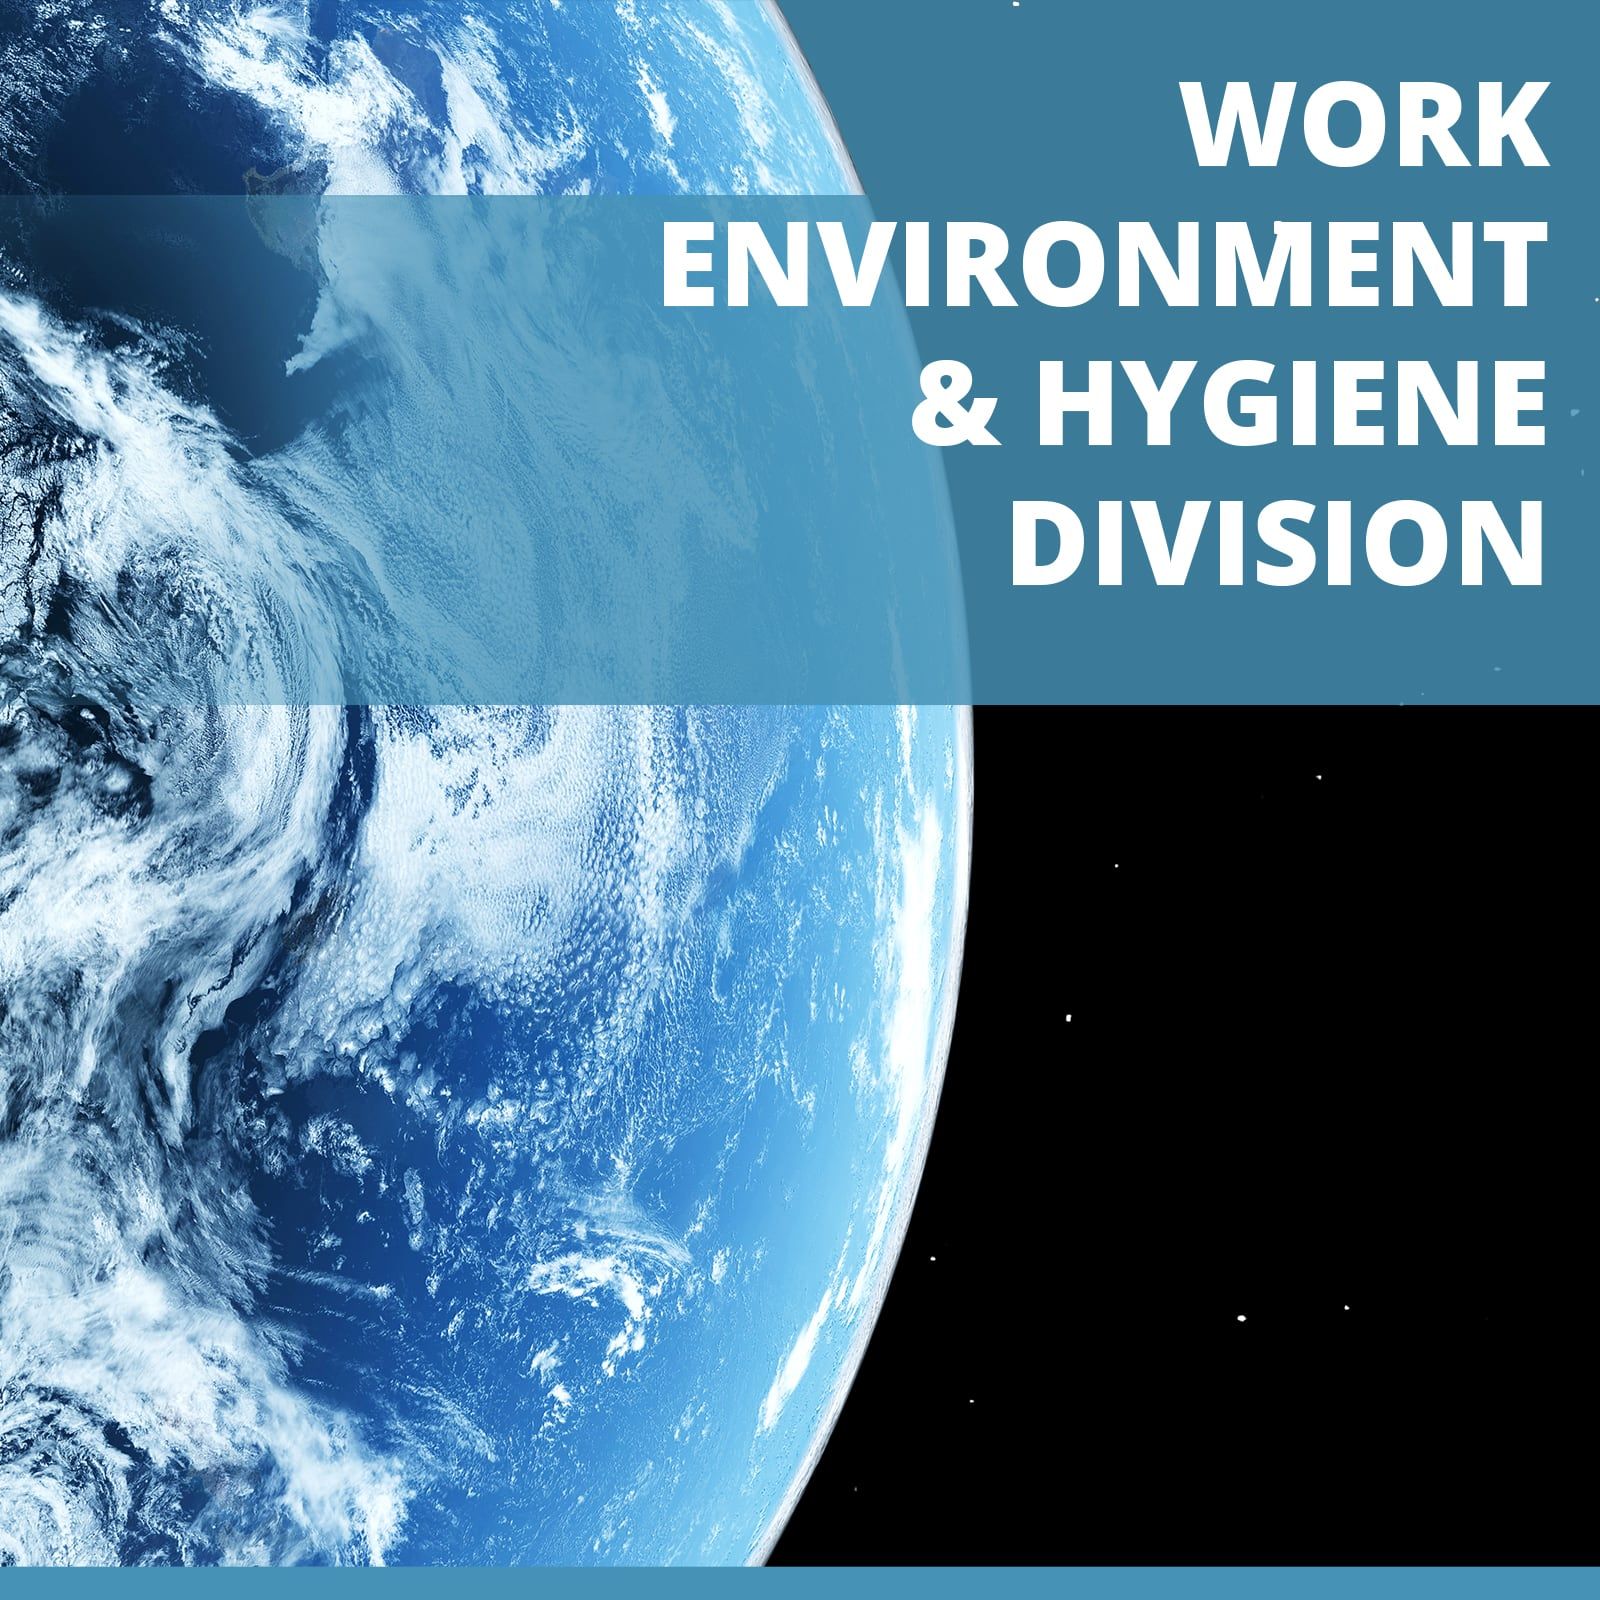 WORK ENVIRONMENT and HYGIENE DIVISION